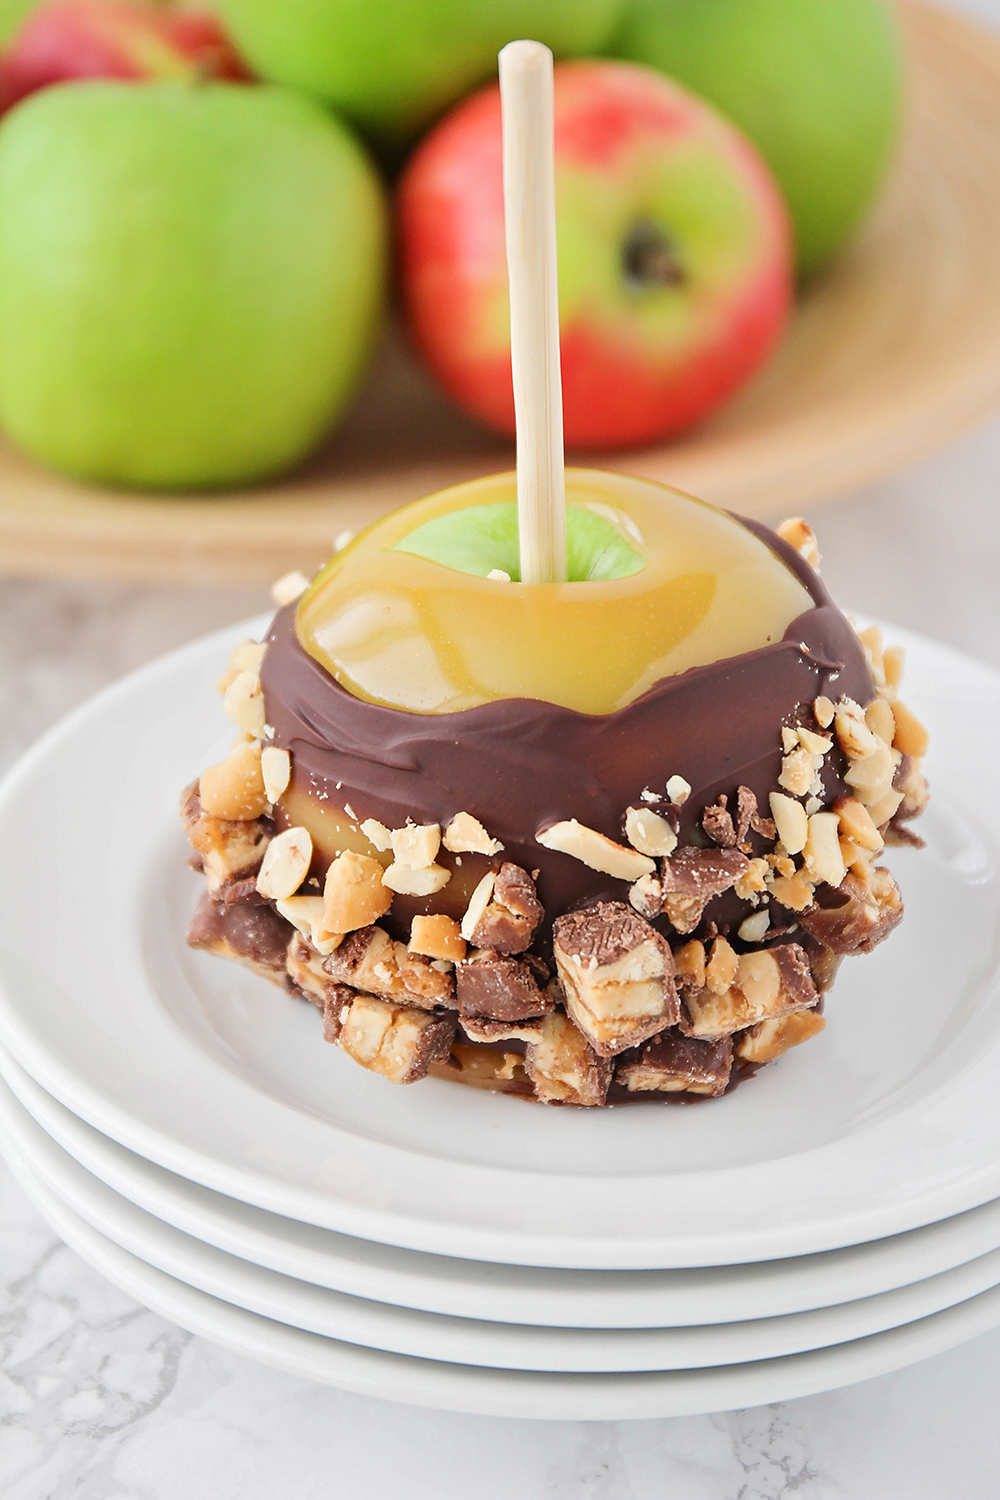 These gourmet caramel apples are made with the best homemade caramel, and taste just like the ones from the candy shop!